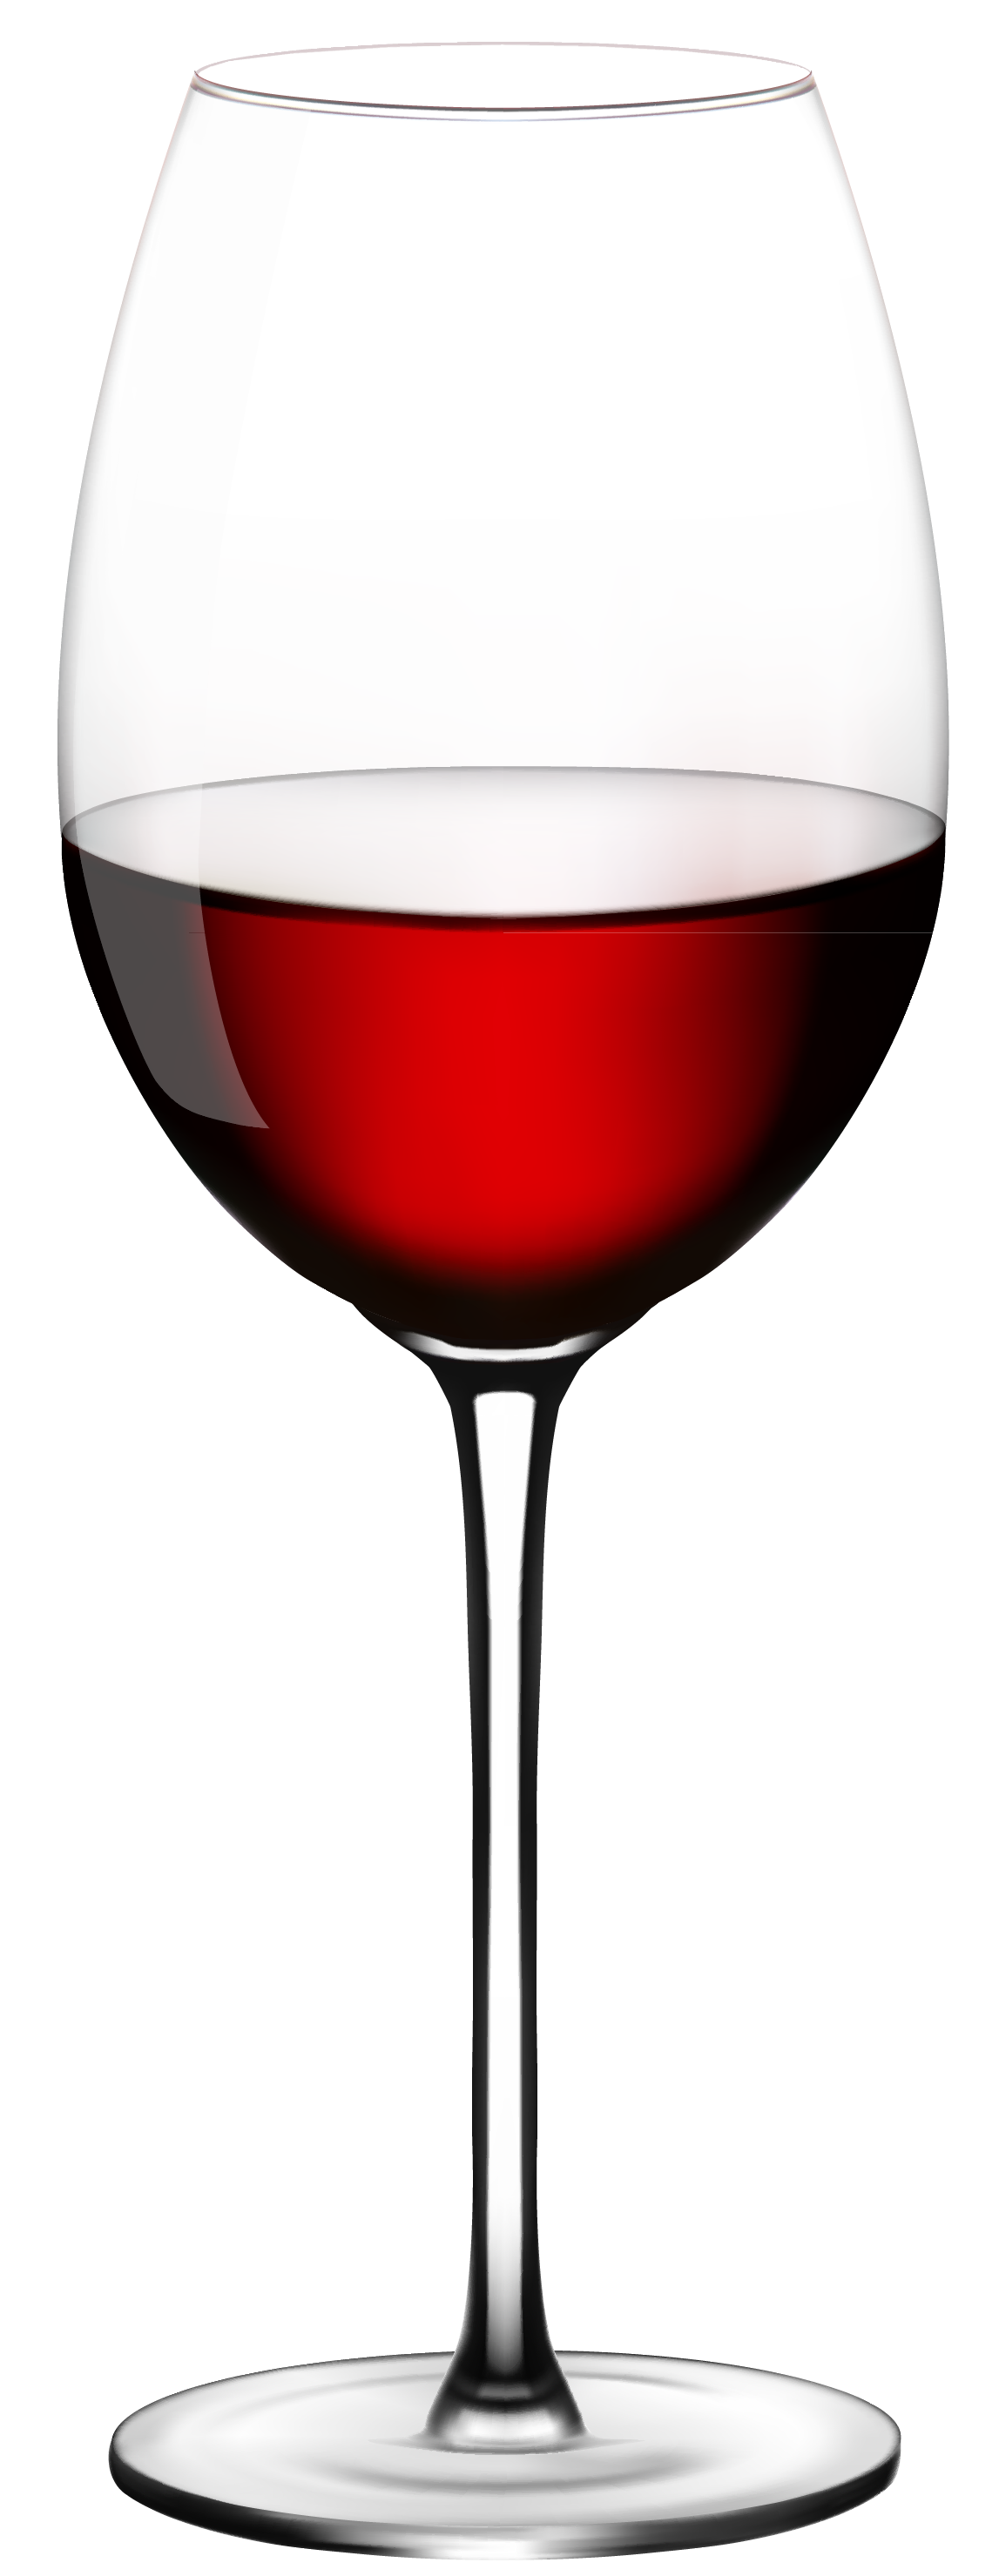 clipart for wine glass painting - photo #46